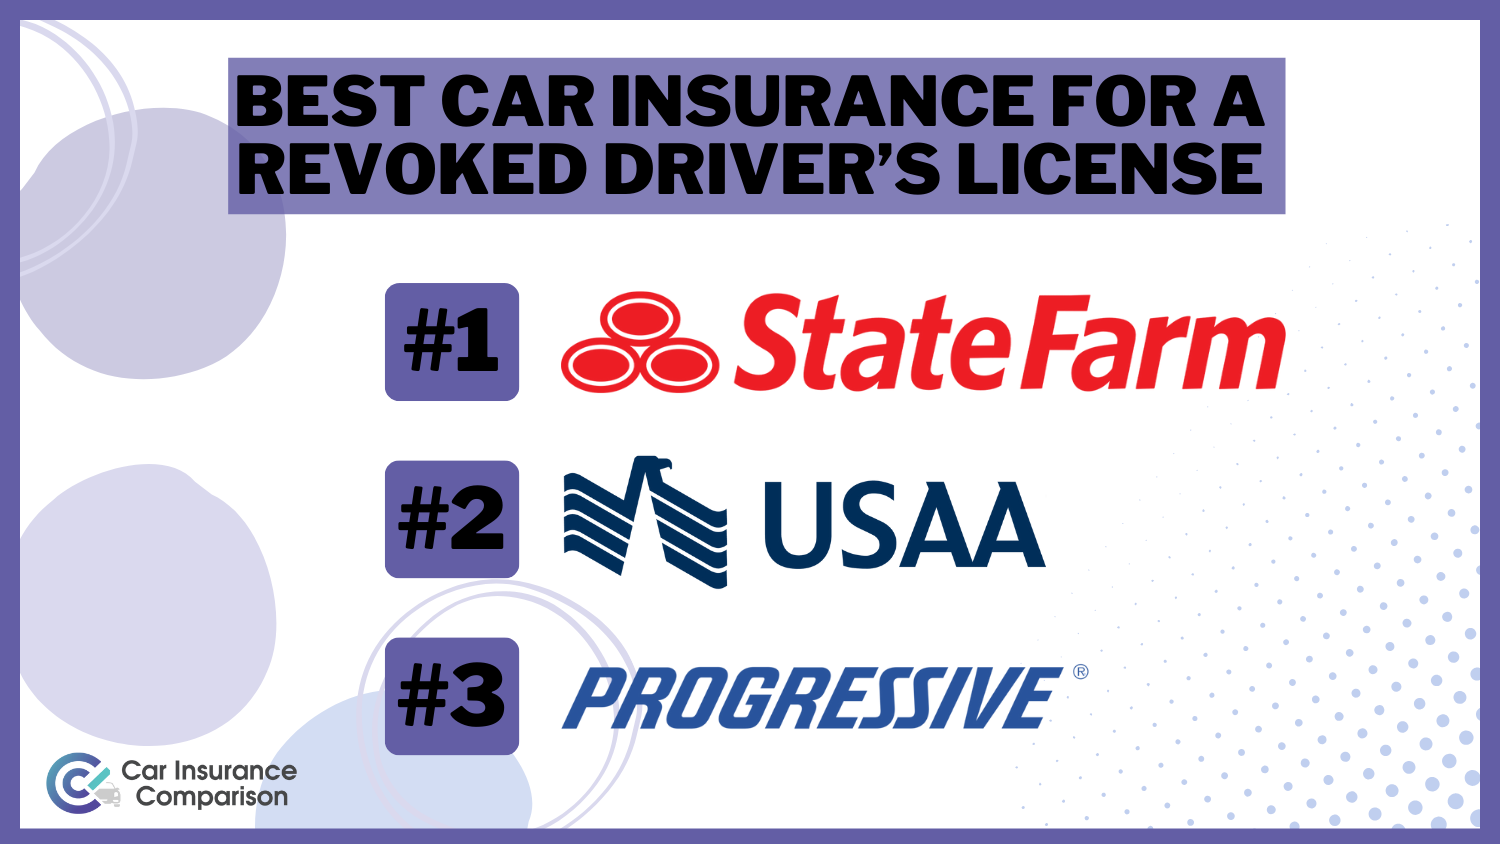 State Farm, USAA, and Progressive: Best Car Insurance For A Revoked Driver's License